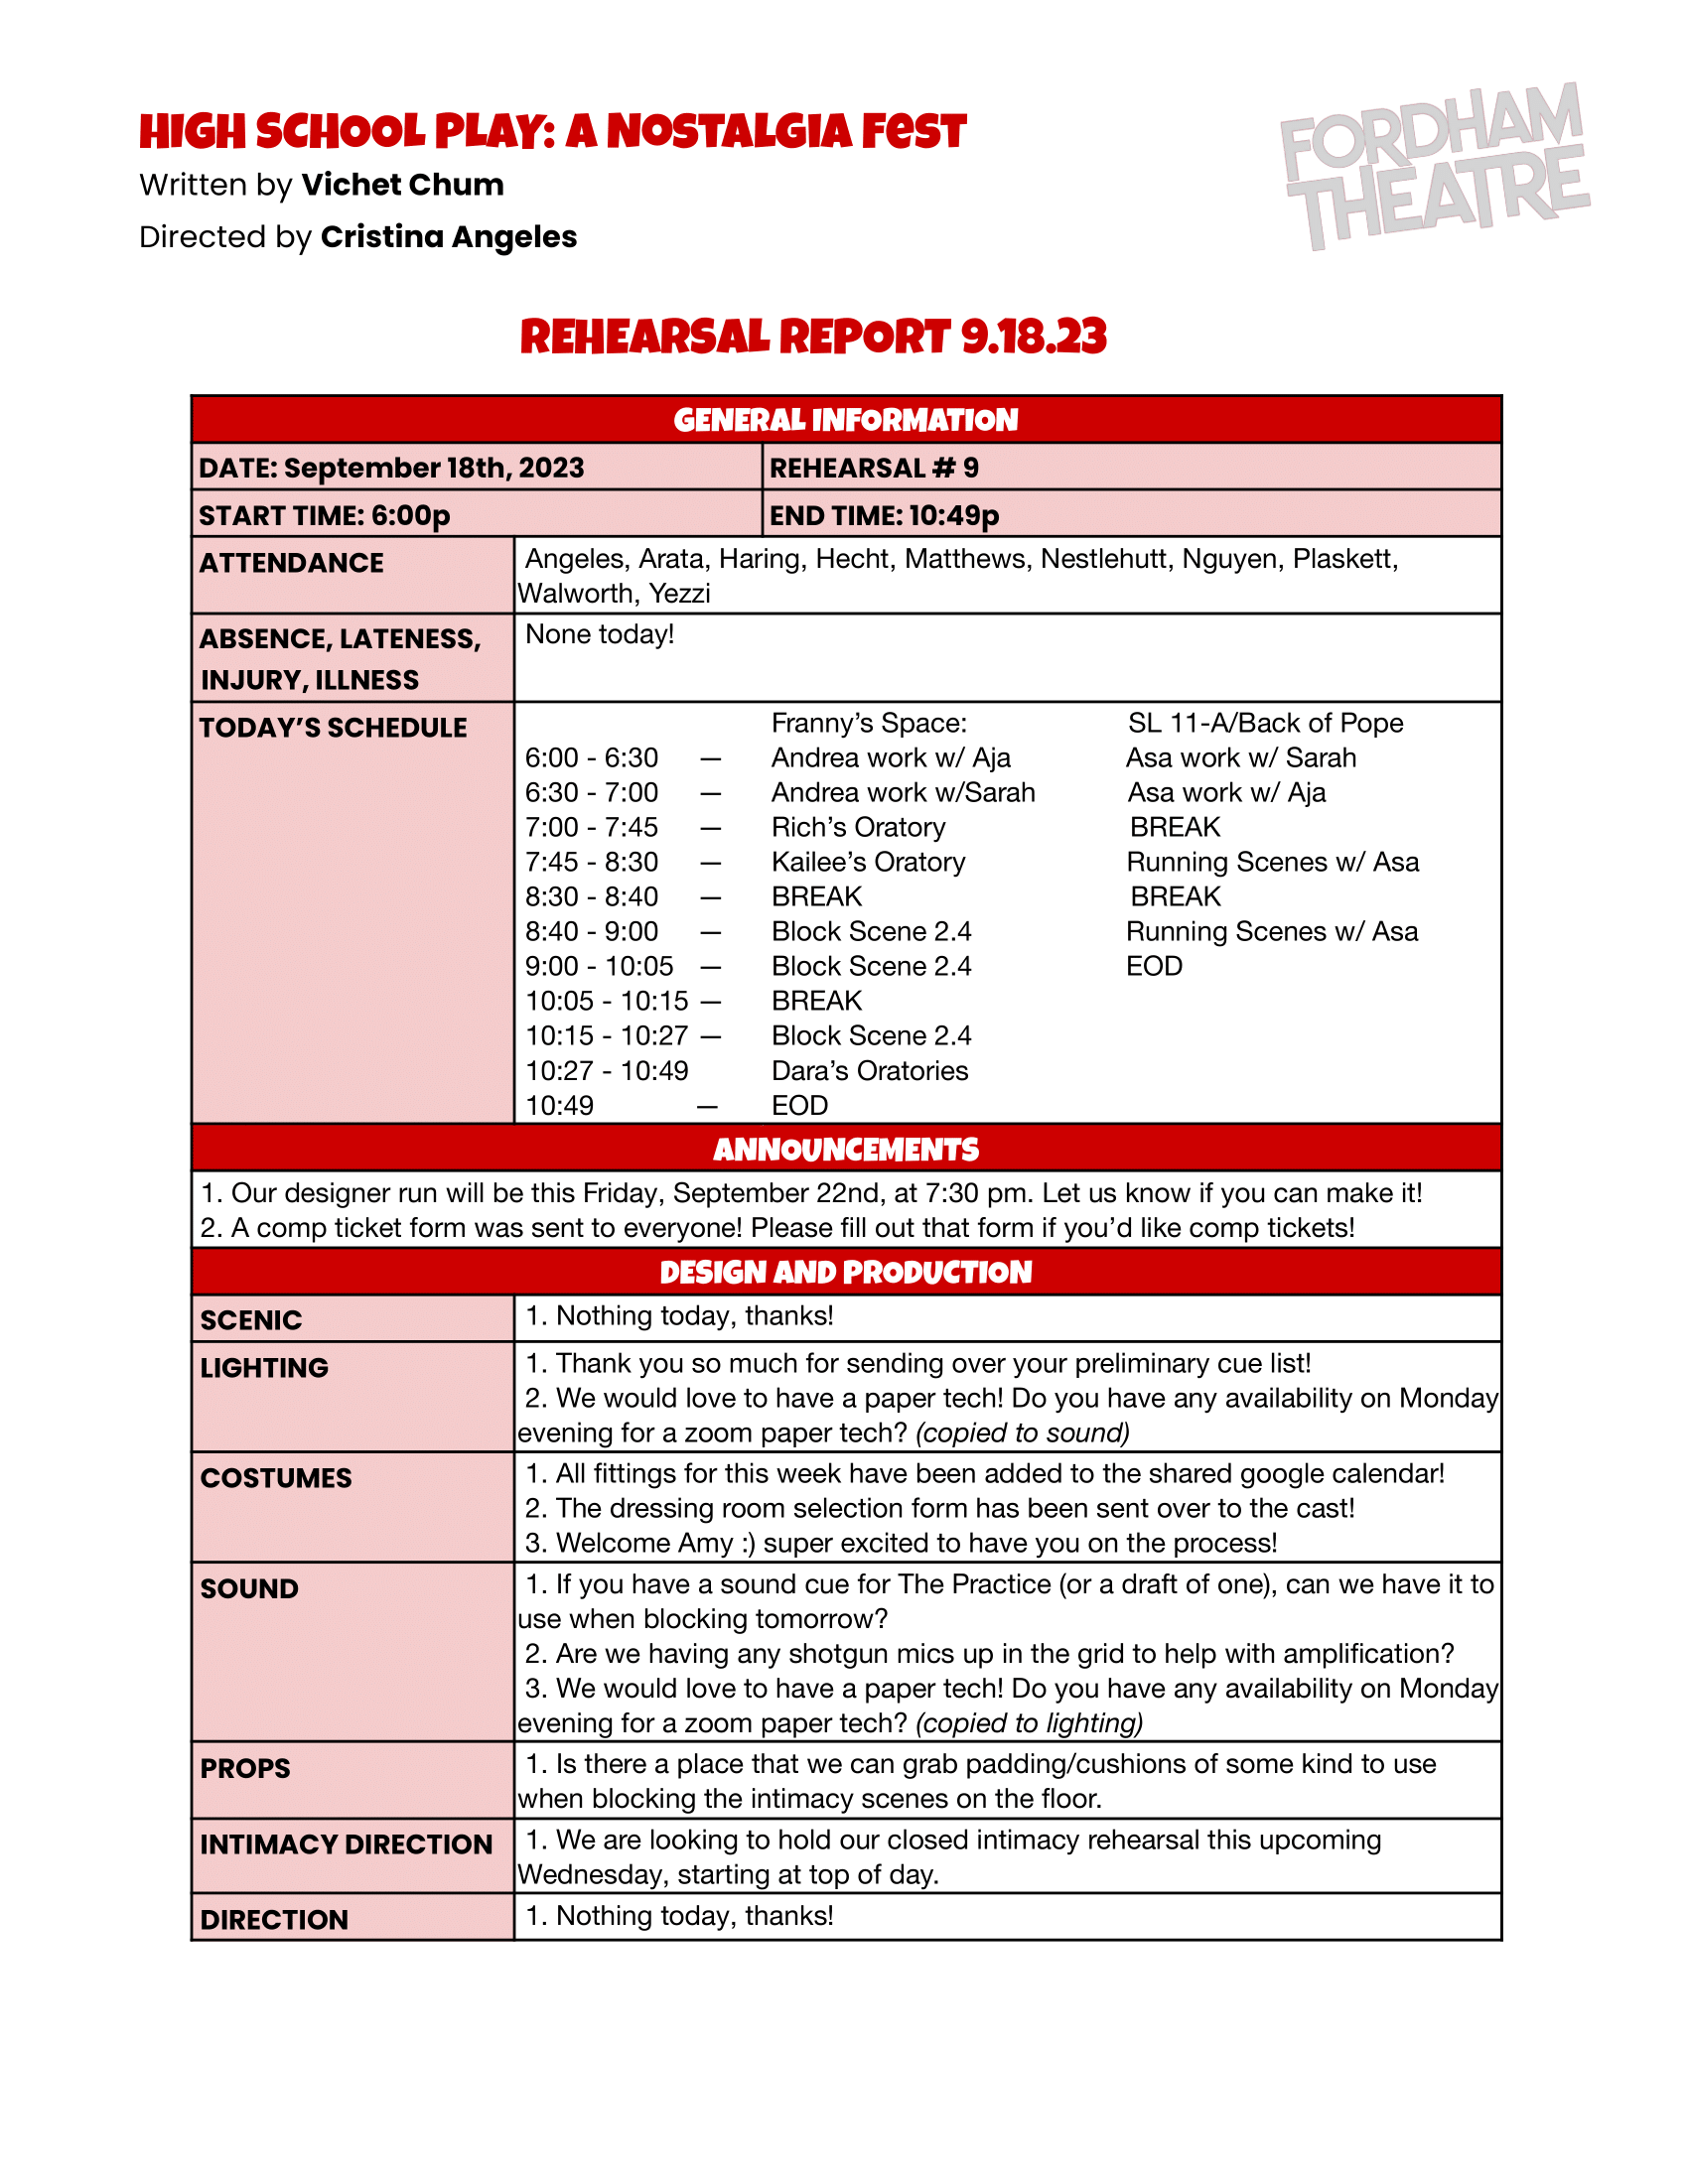 9 HSP Rehearsal Report 9.18.23-1.png